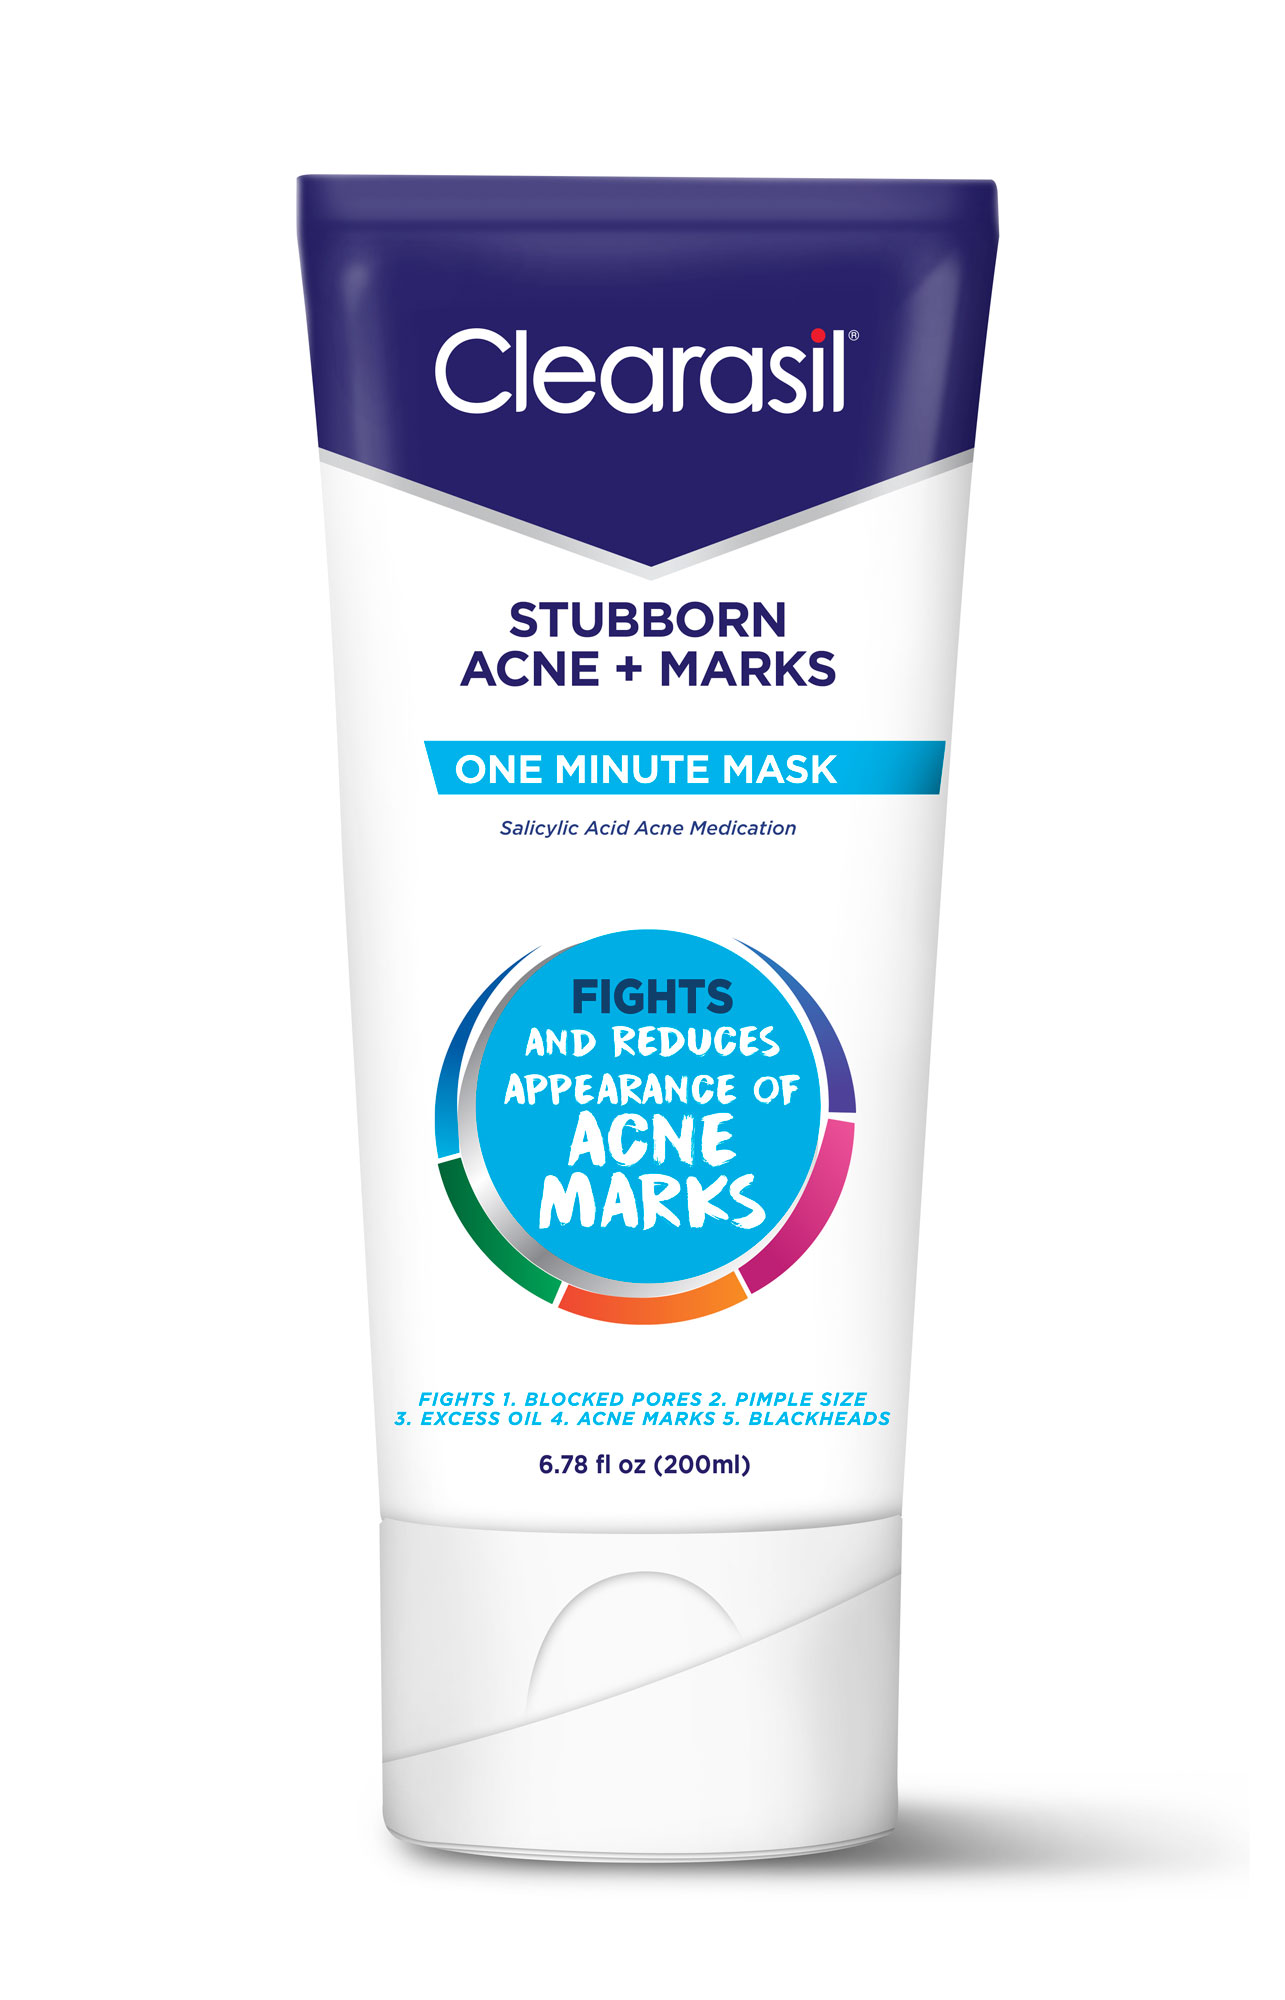 CLEARASIL Stubborn Acne Control One Minute Mask Discontinued 5112021 Photo